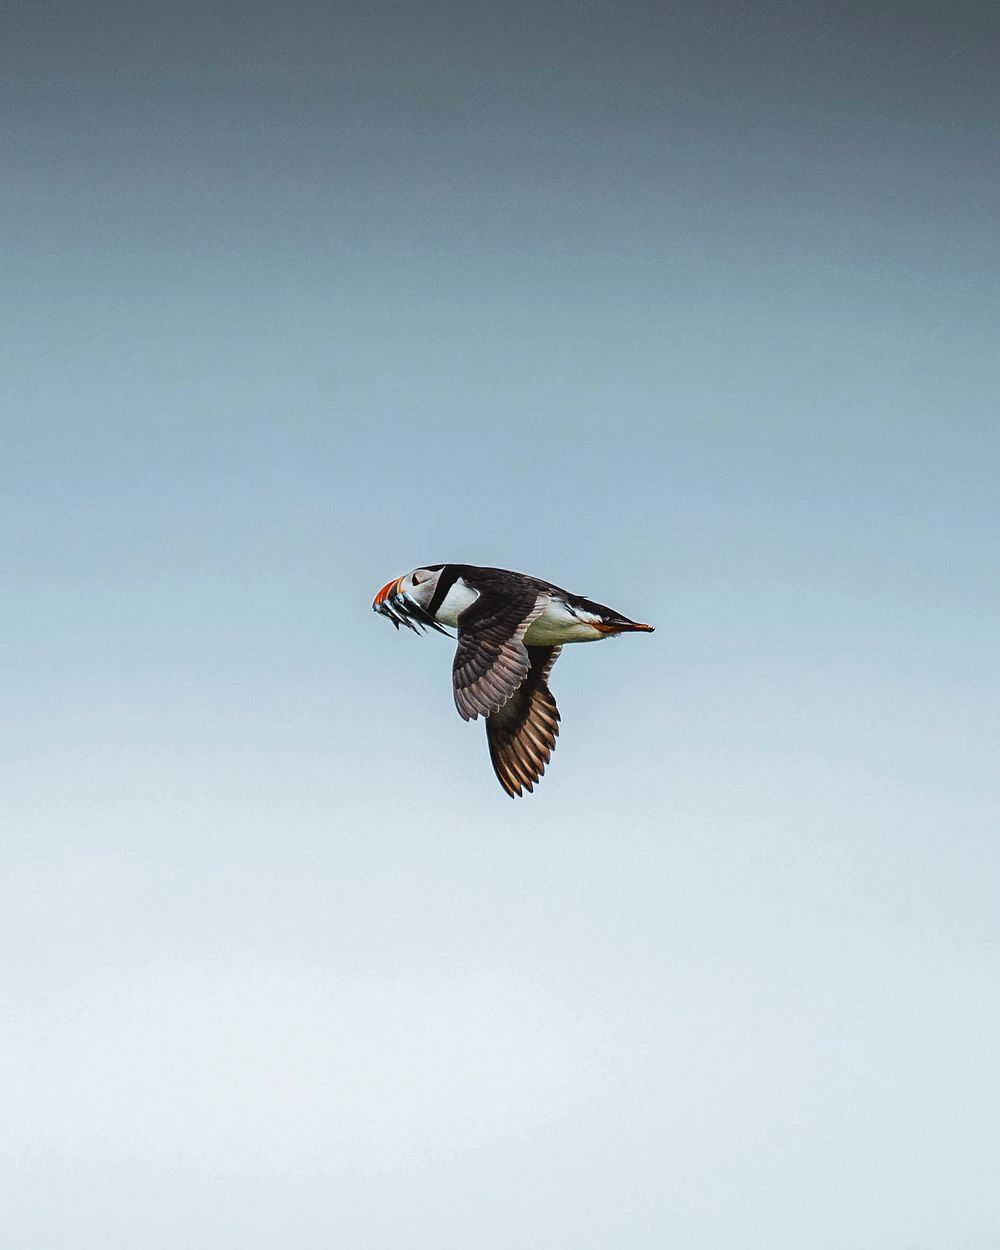 Flying puffin over the Farne Island in Northumberland, England